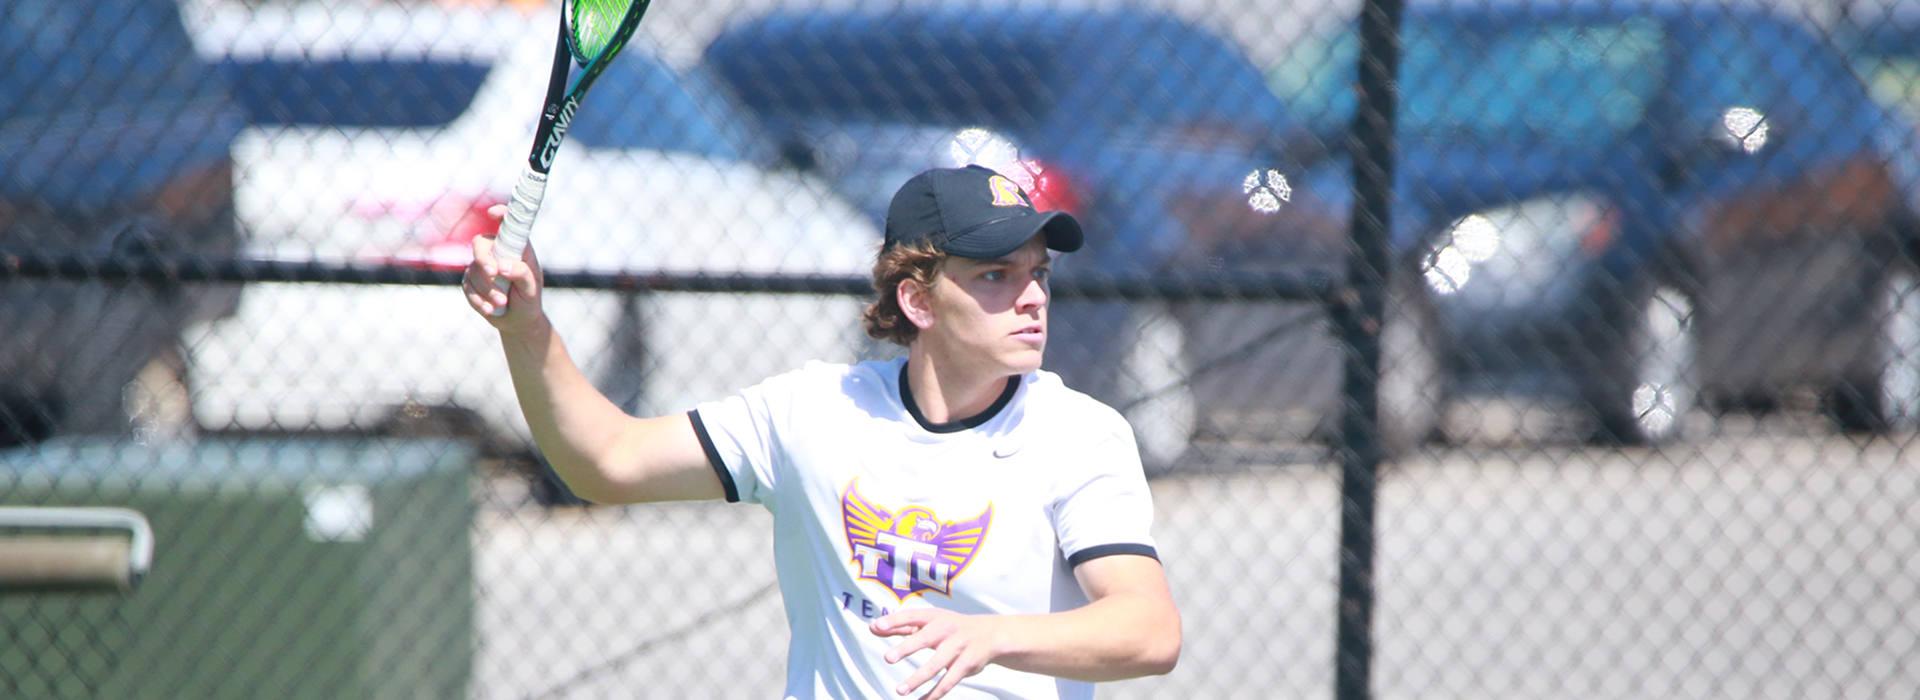 Tech tennis back in action with trio of weekend matches